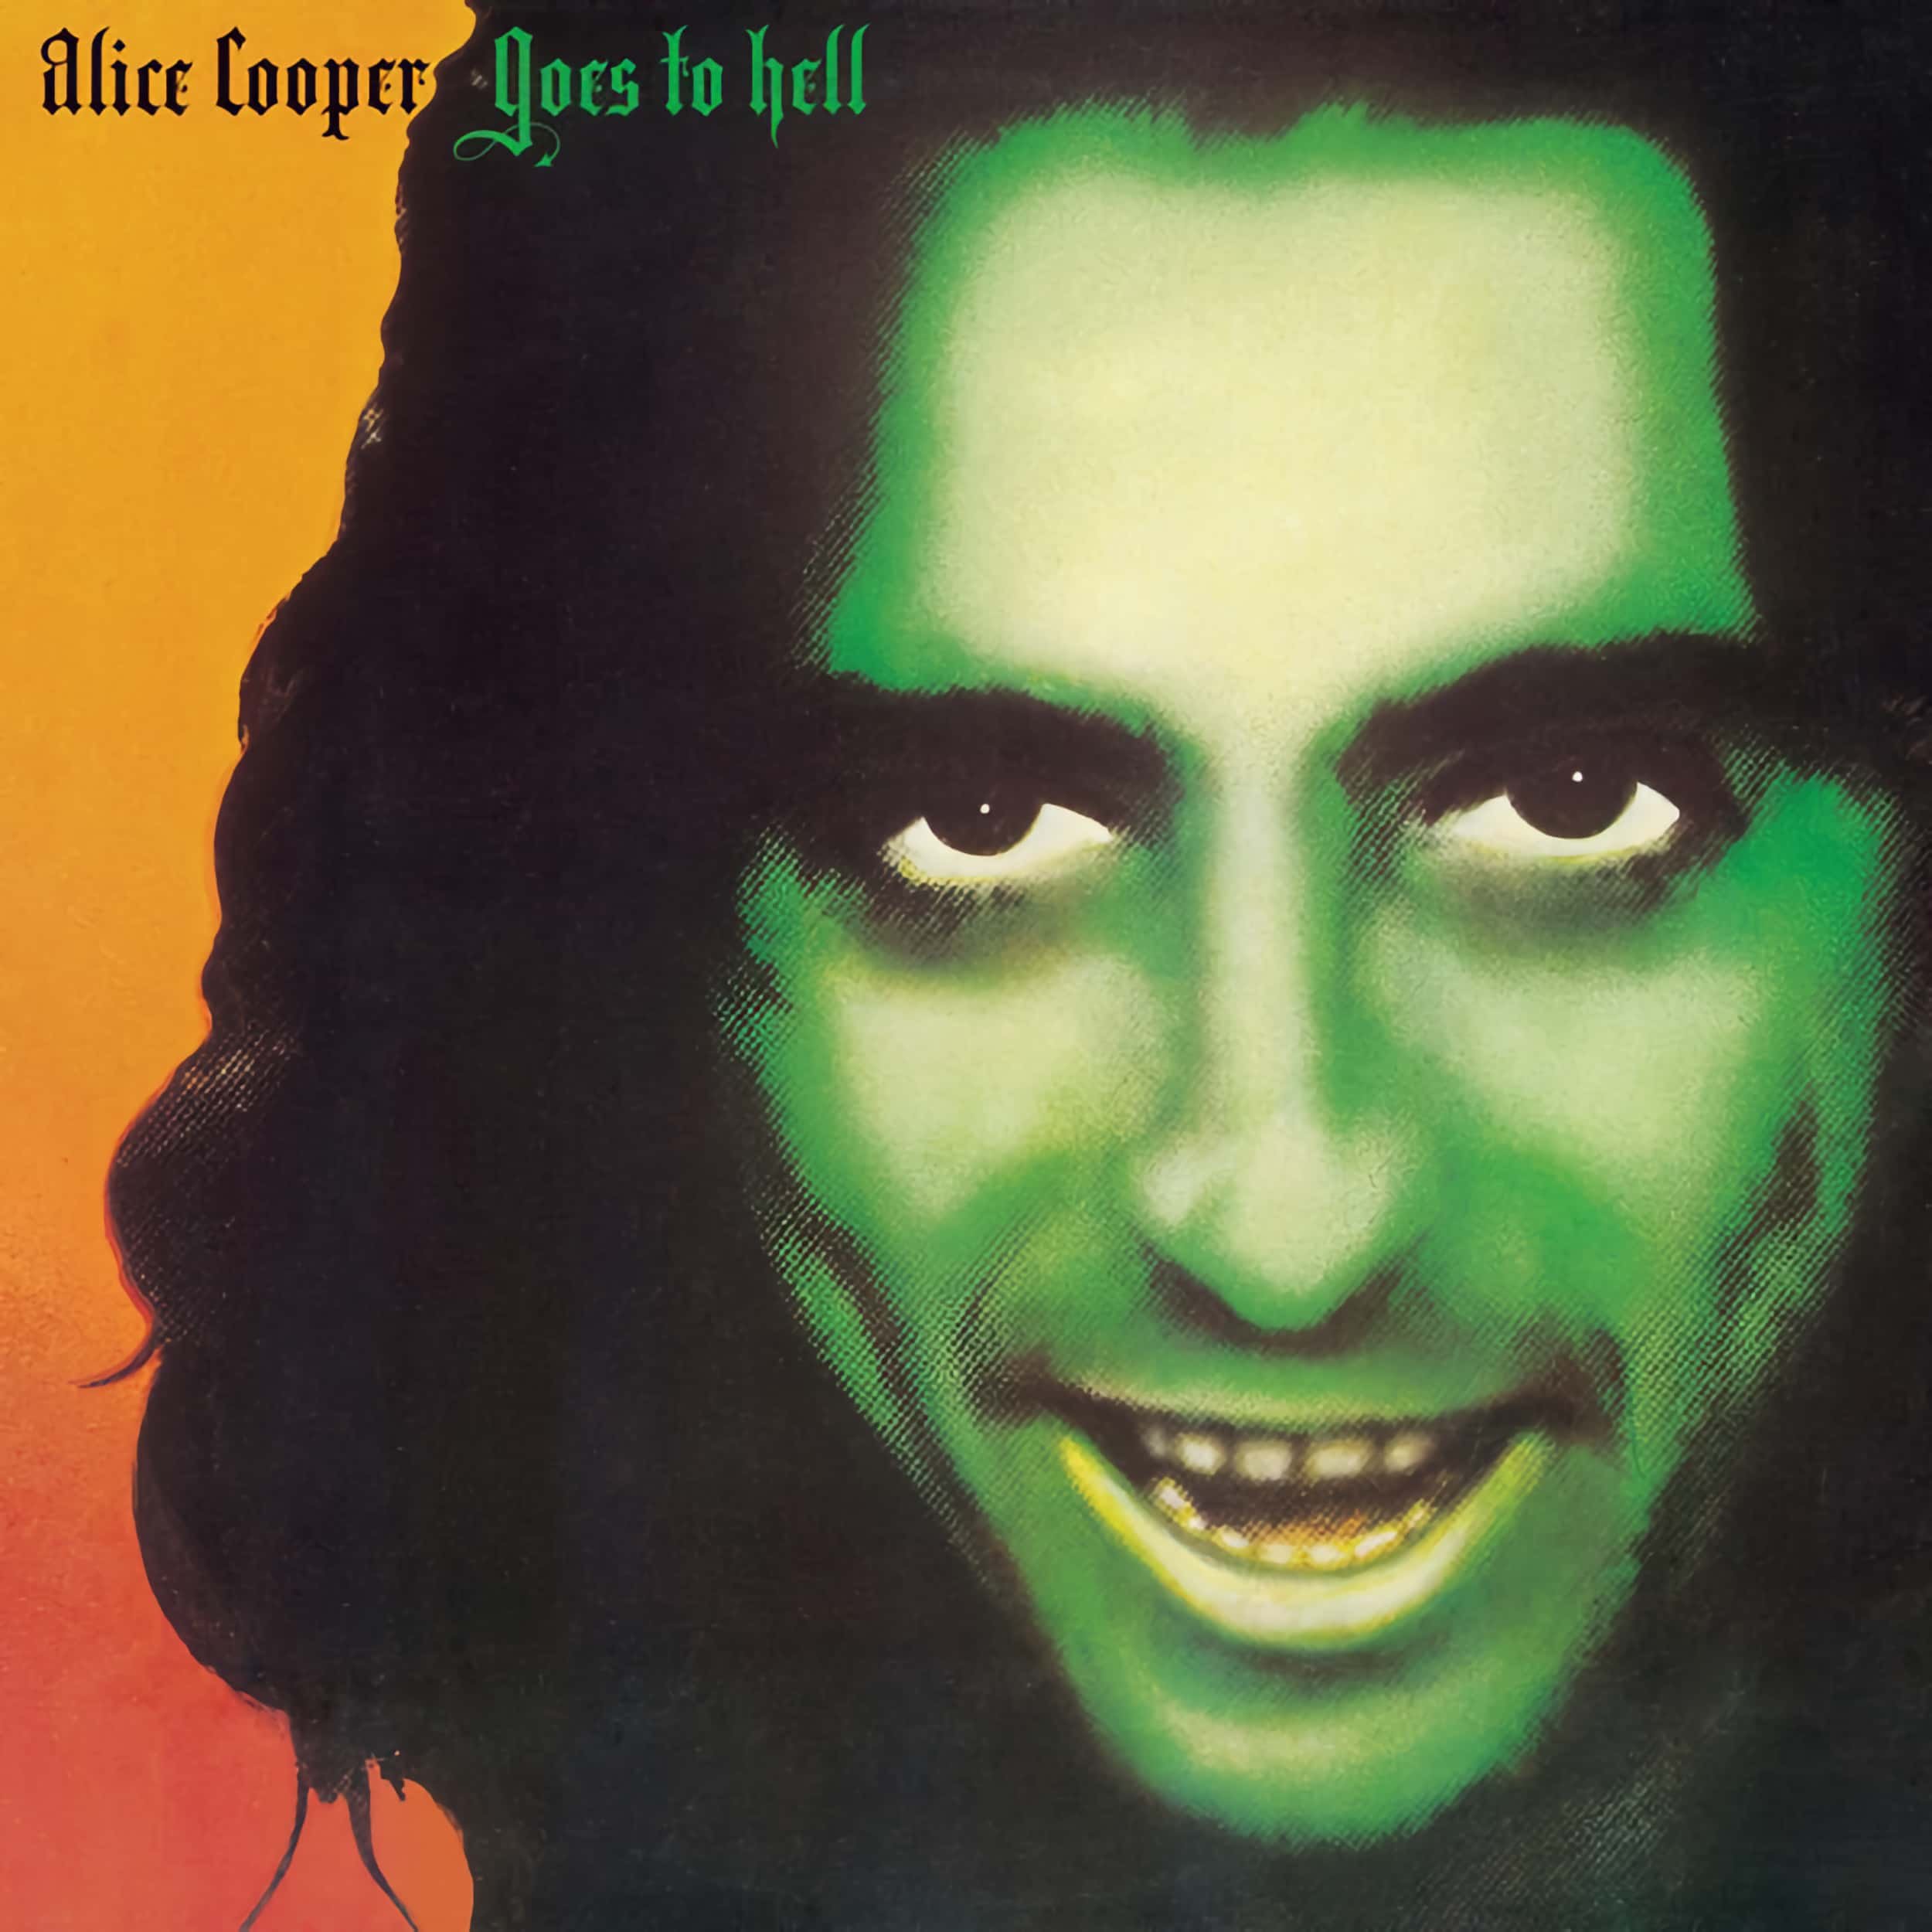 Alice Cooper – Alice Cooper Goes to Hell (Album Review) — Subjective Sounds